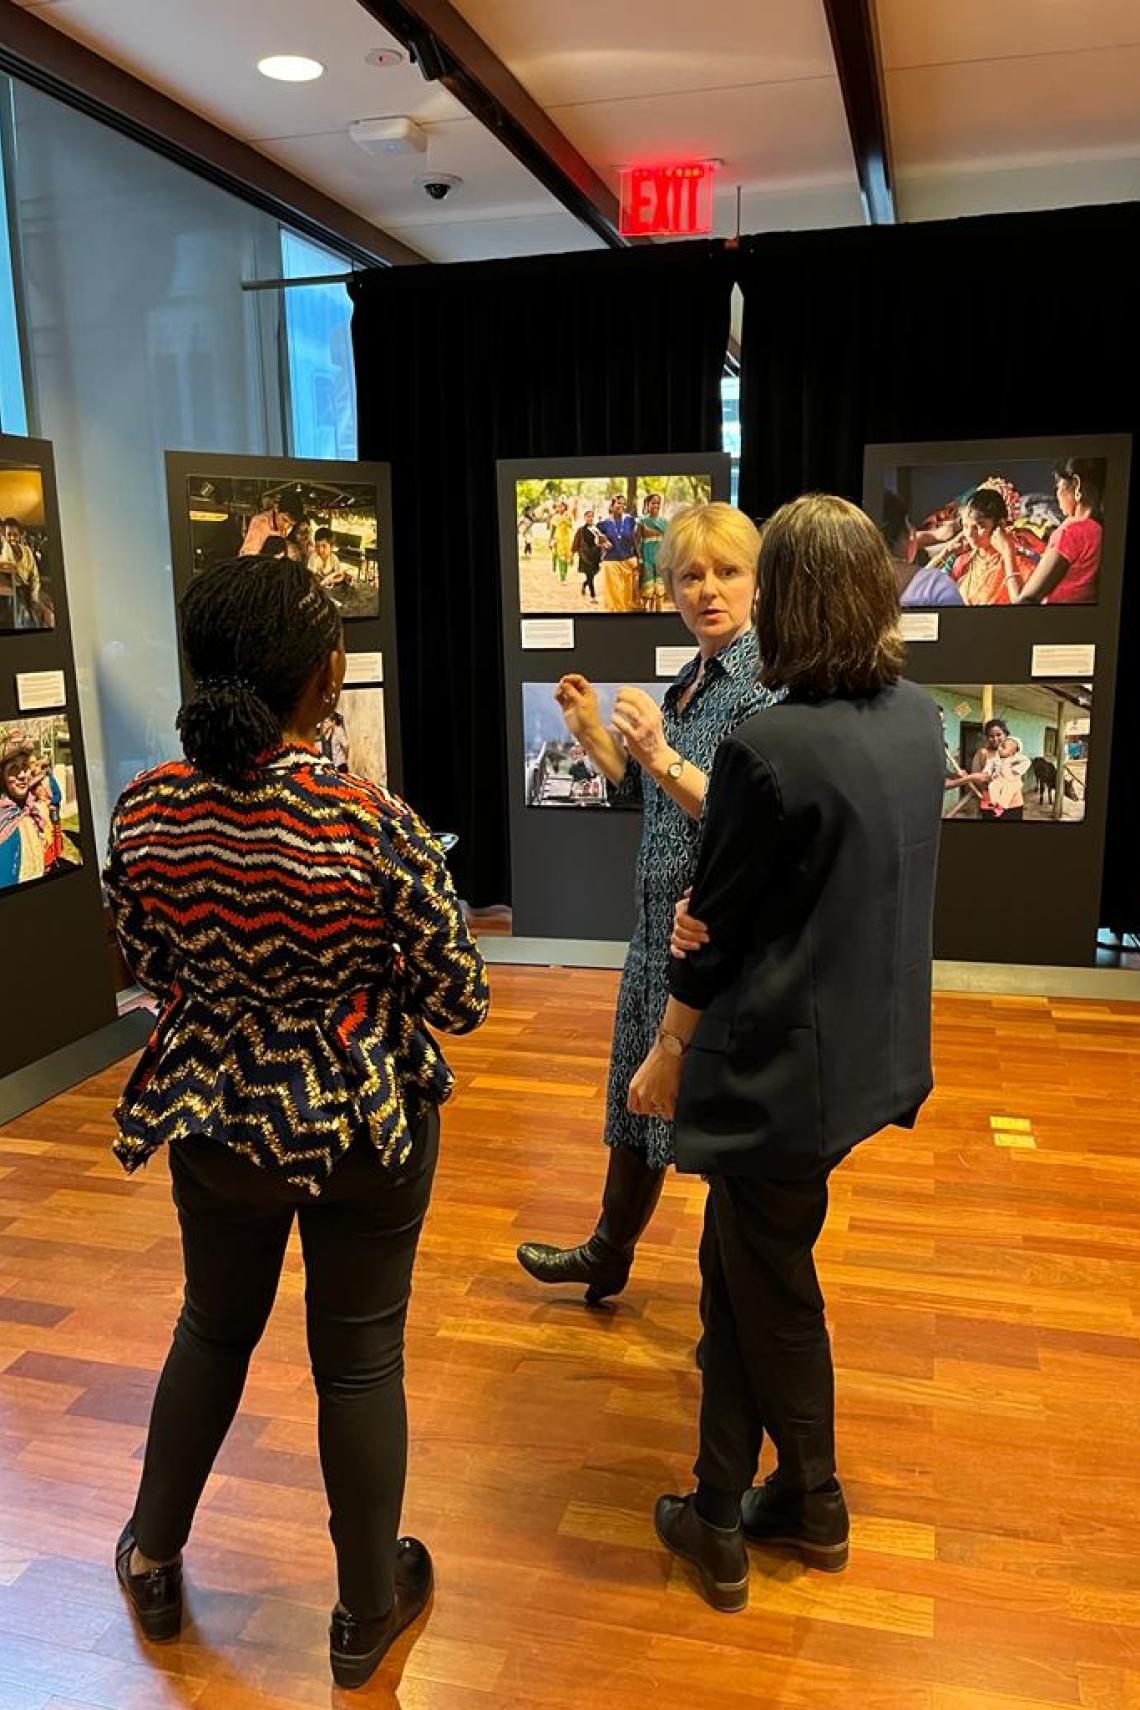 A group of people in conversation with photographs in the background